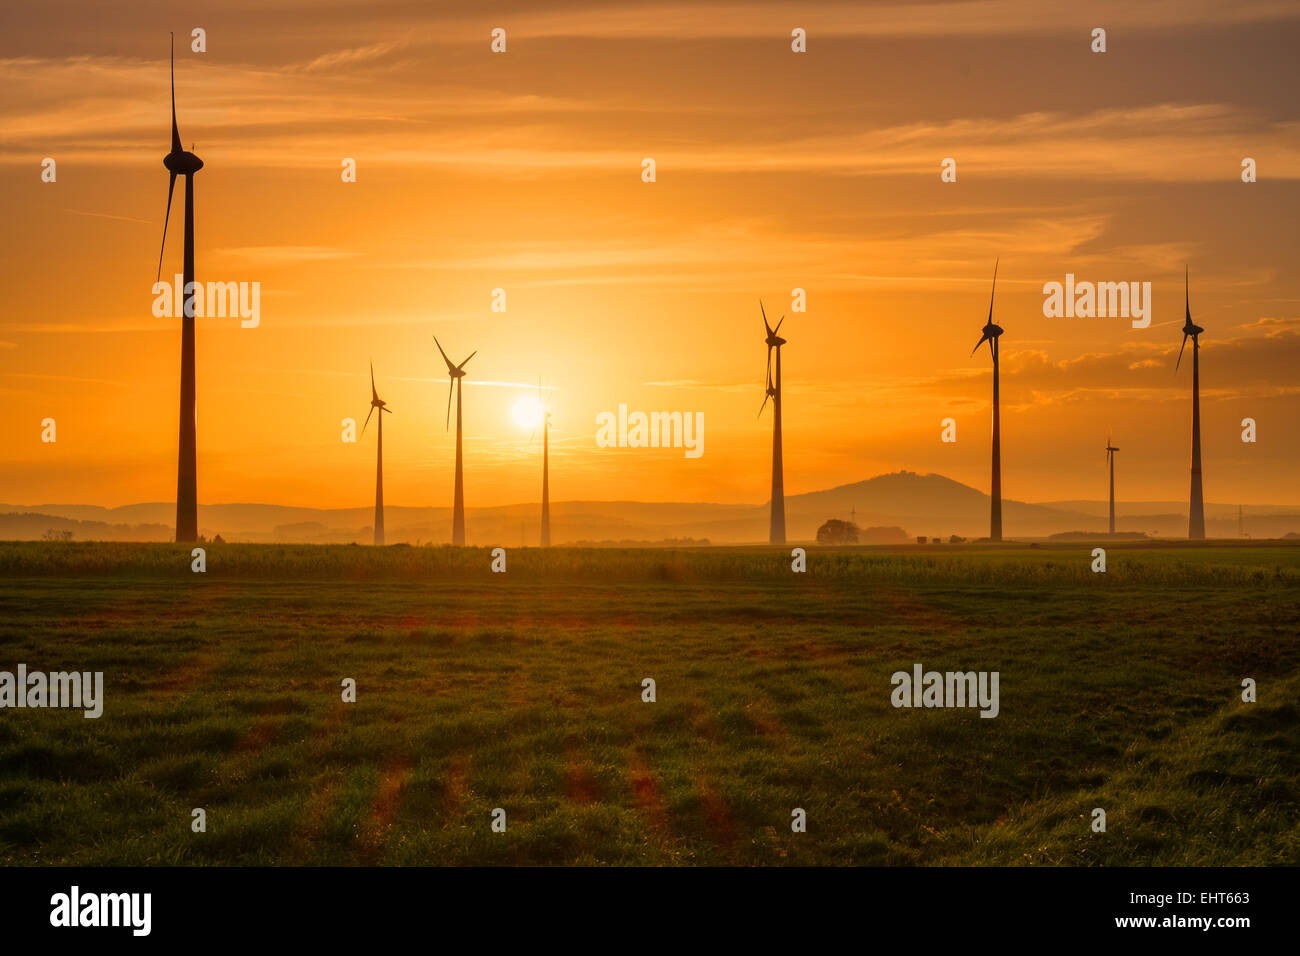 Several wind engines at sunset seen in Germany Stock Photo